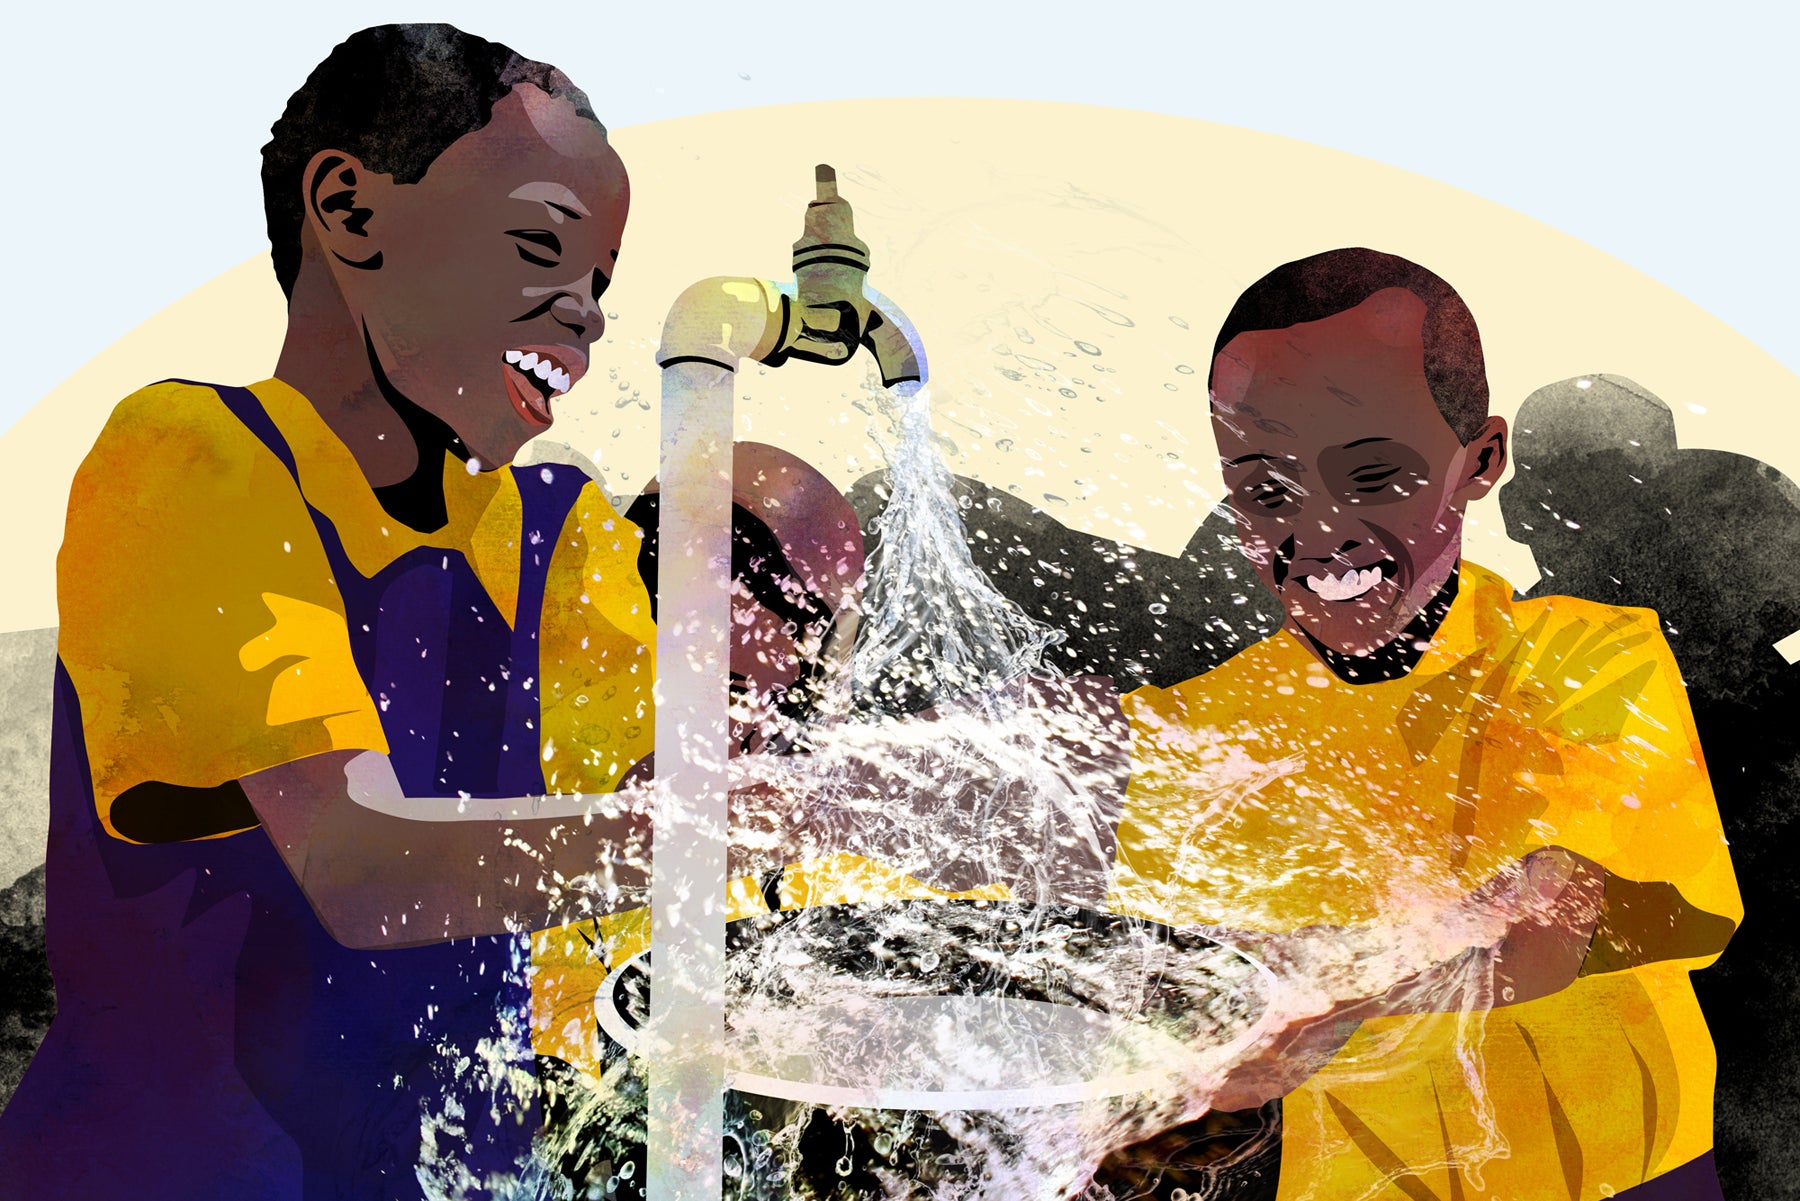 Illustration of two laughing children in Ghana at a gushing water tap.